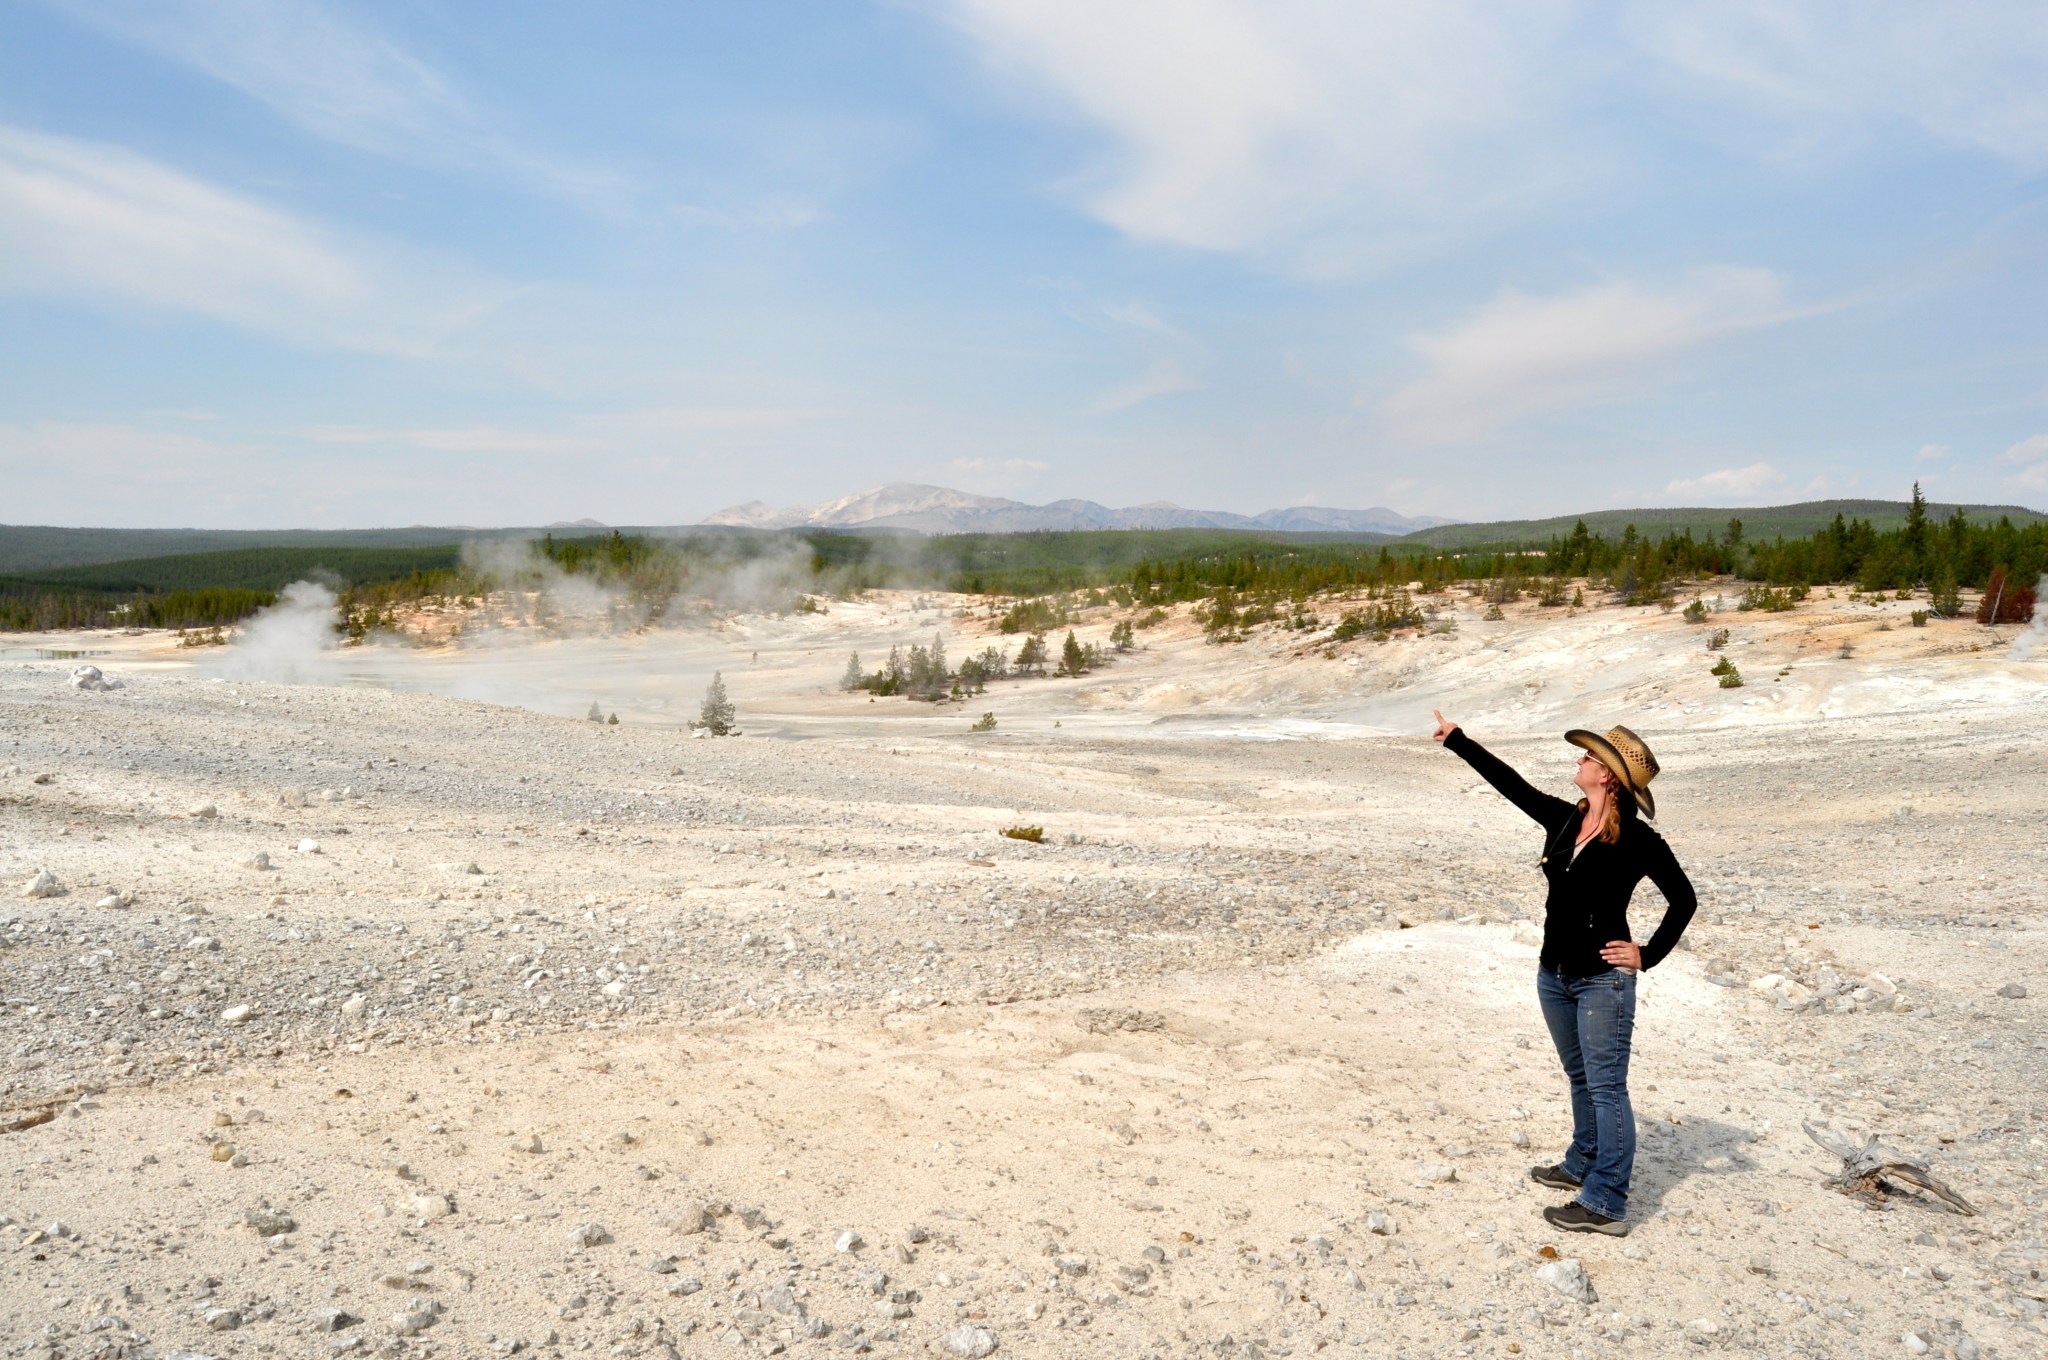 A scientist in a barren landscape pointing up, with steam rising in the background.